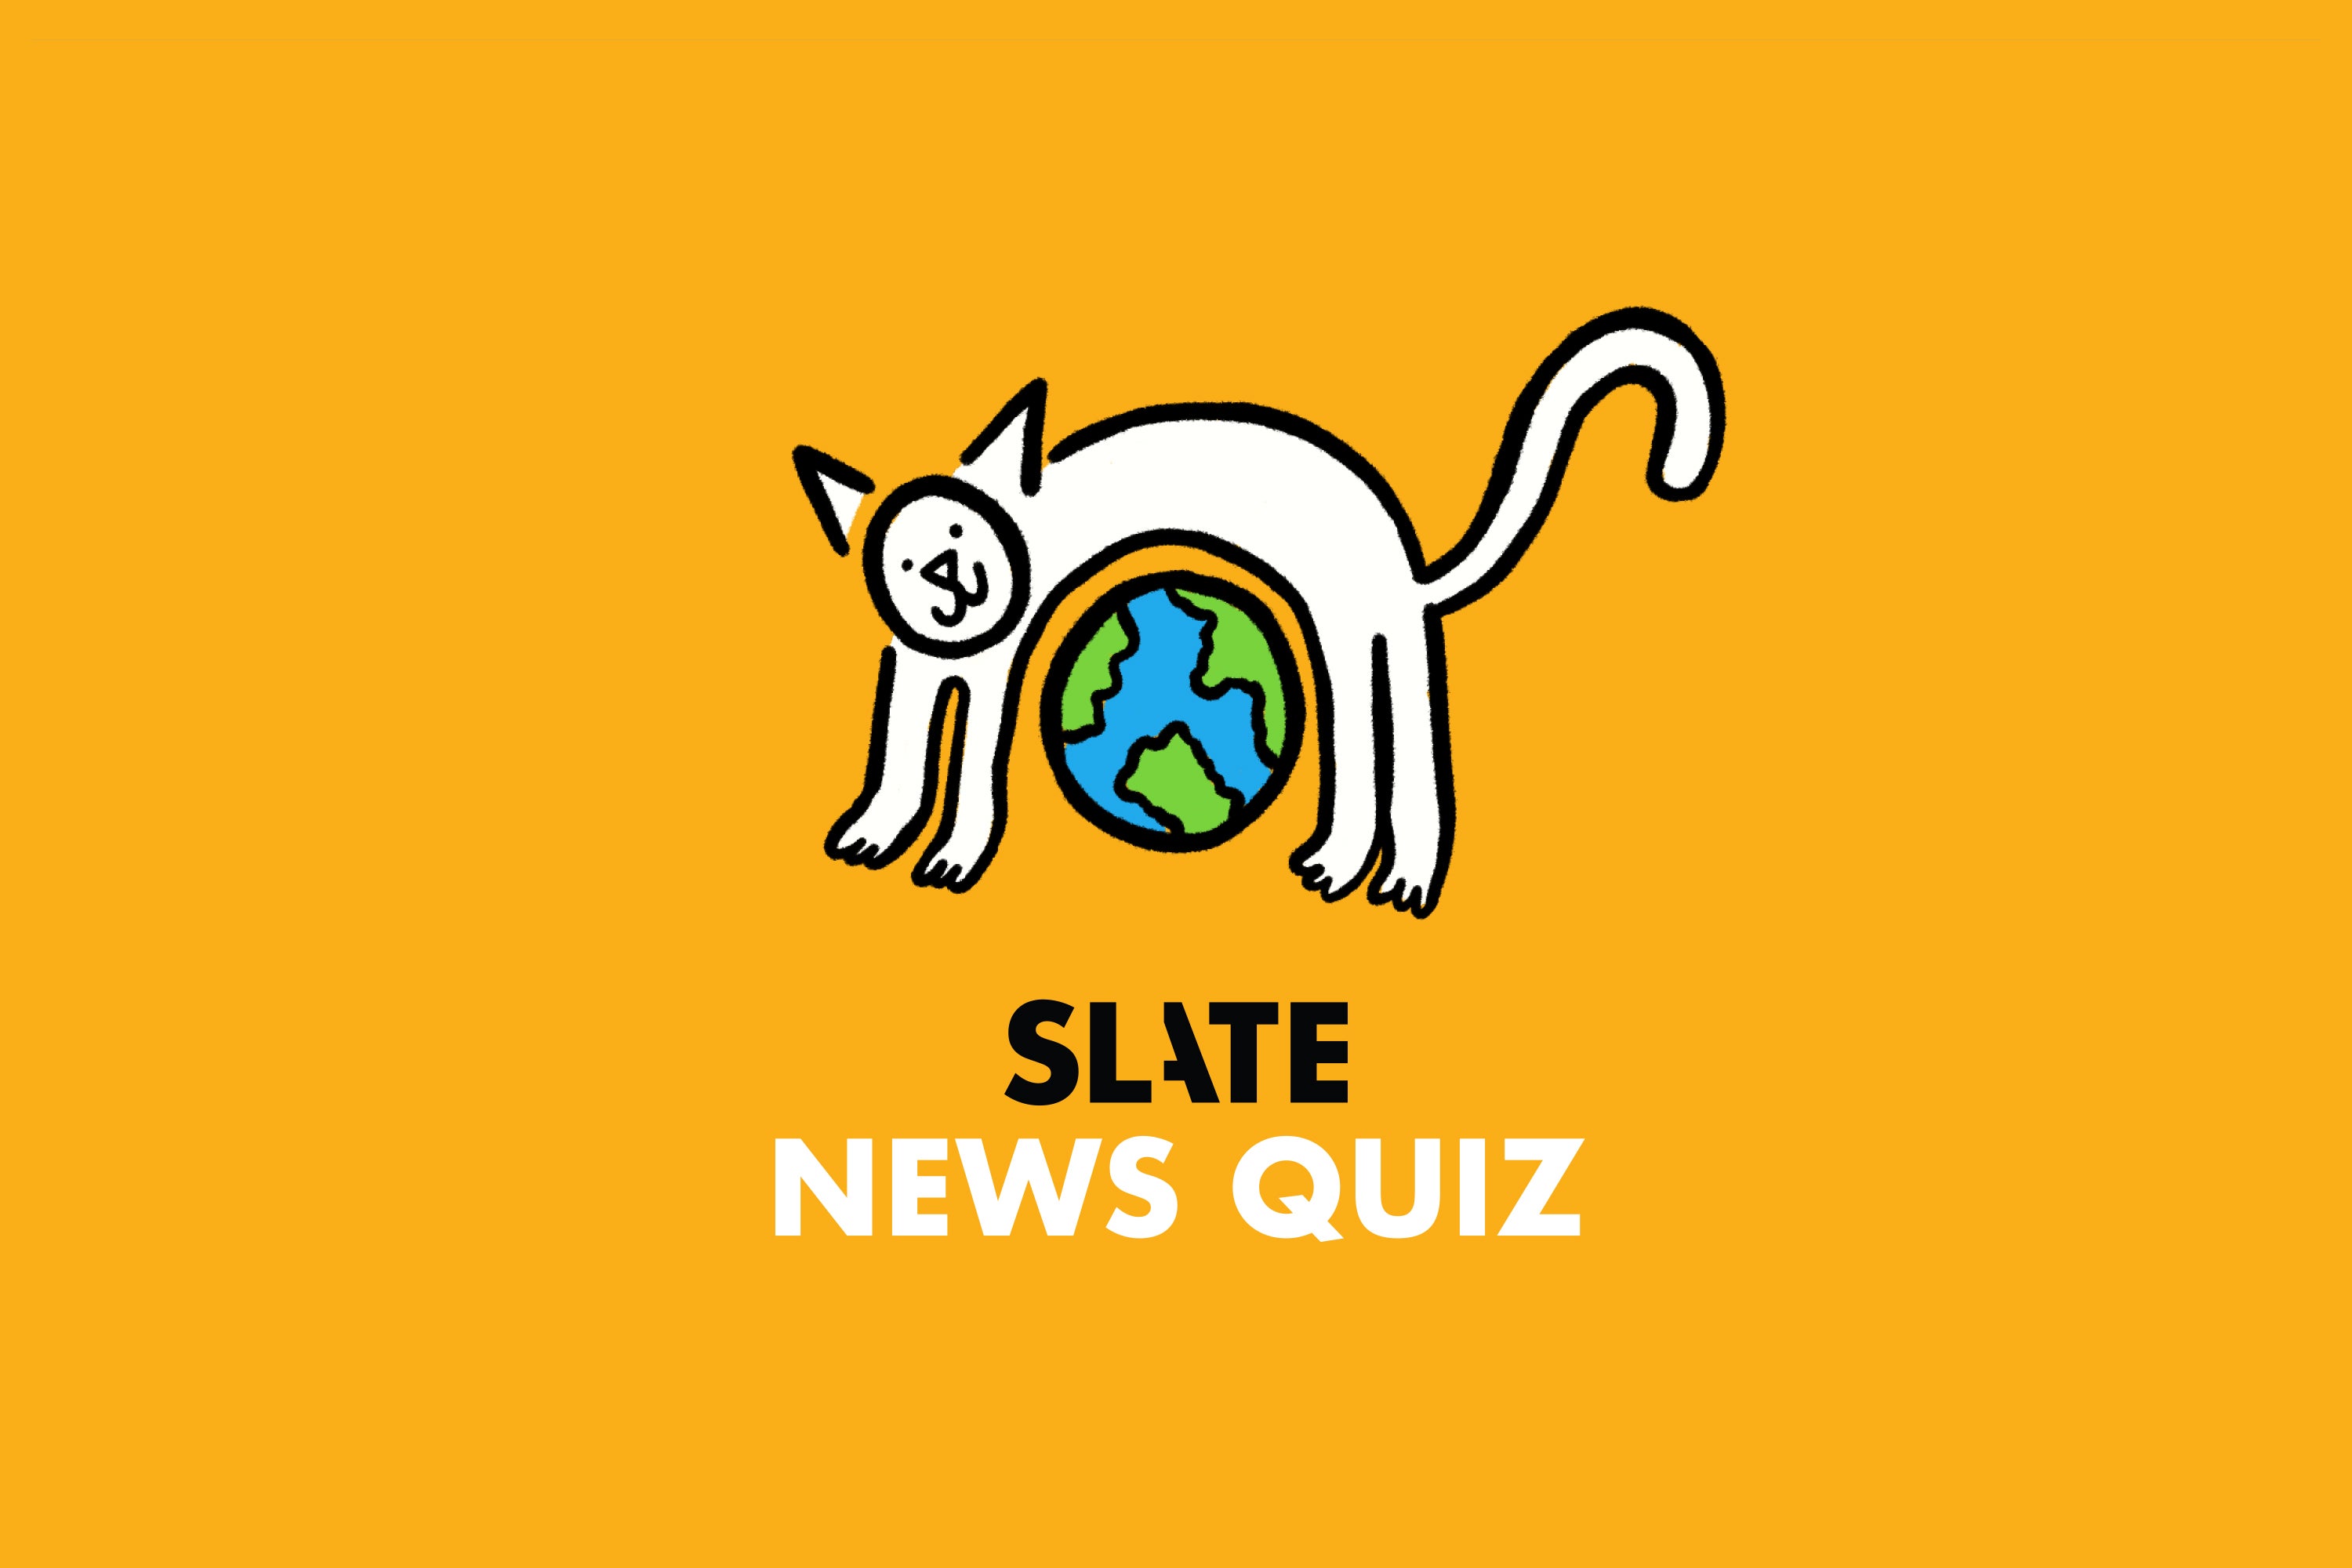 Think You’re Smarter Than a Slate Senior Editor? Find Out With This Week’s News Quiz. Ray Hamel